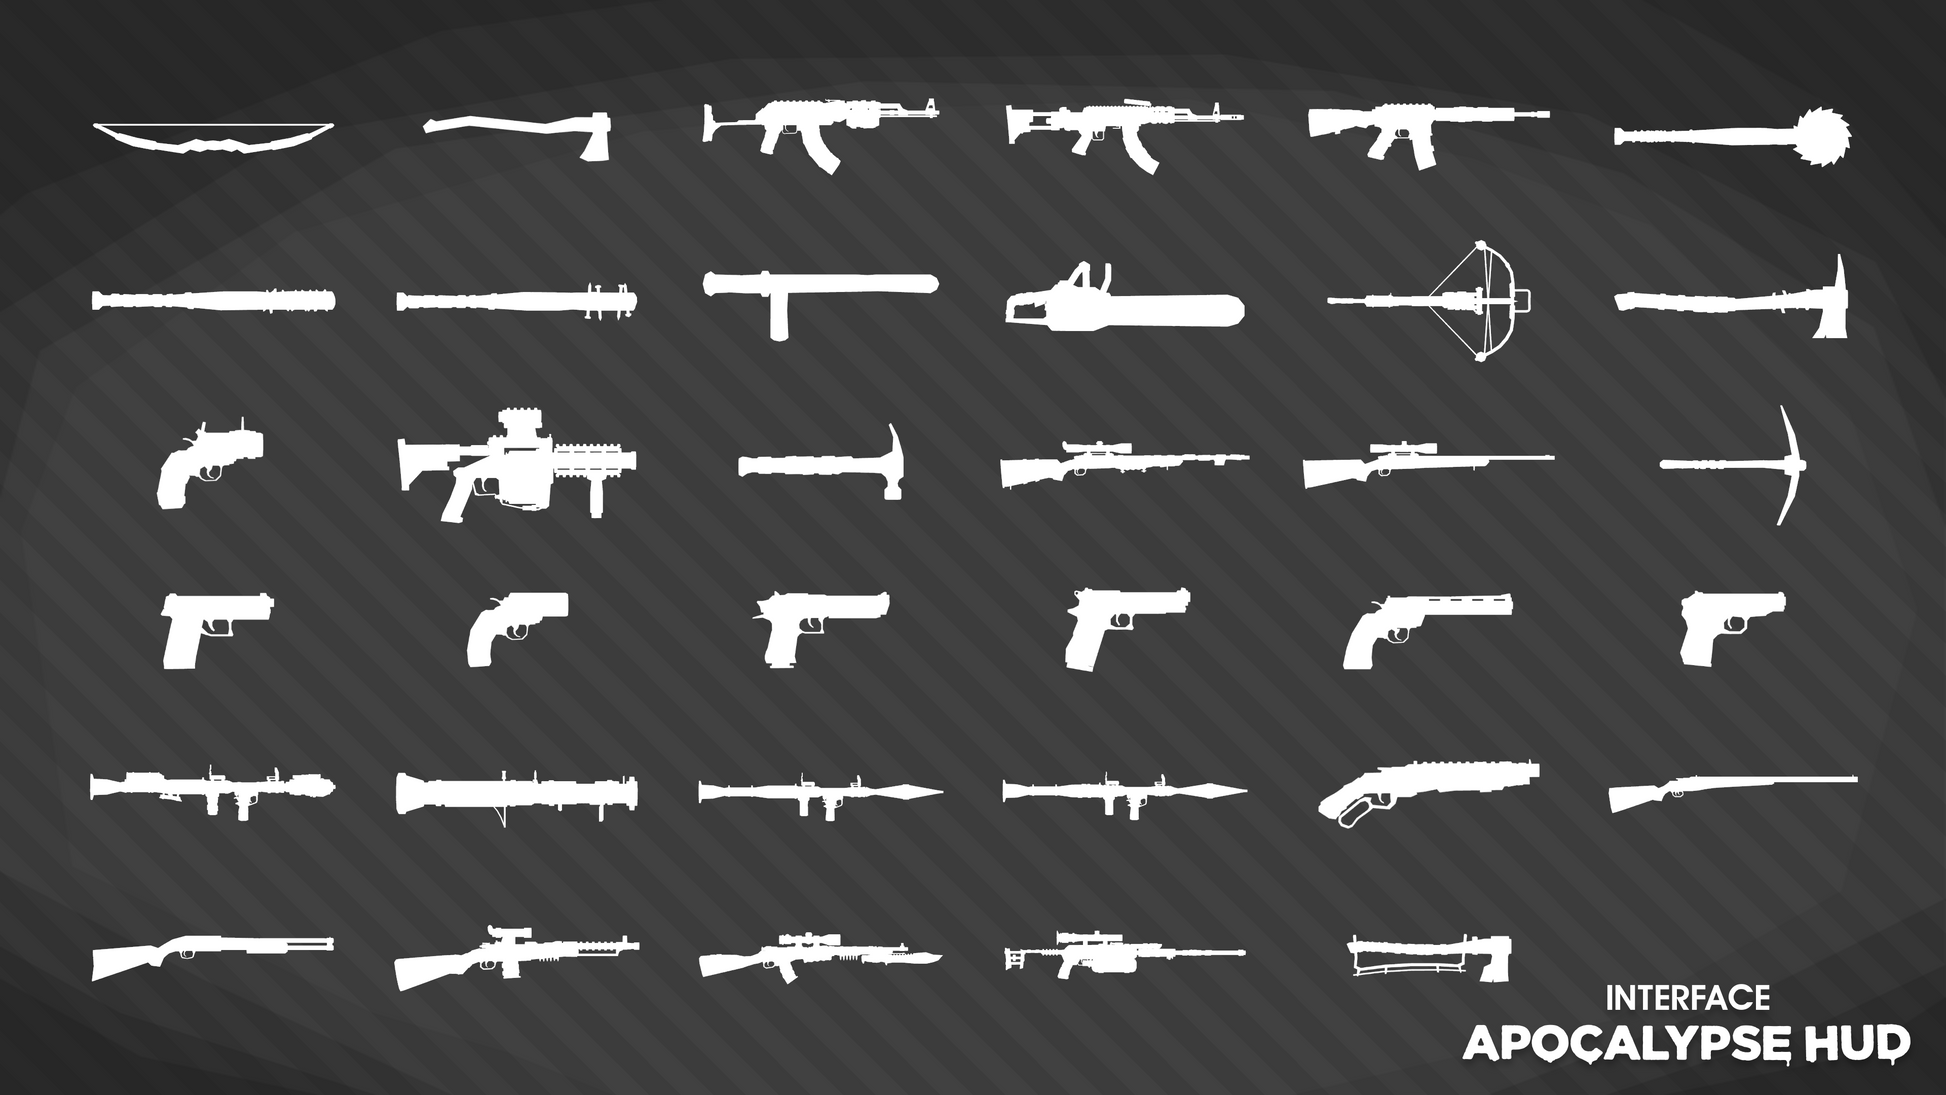 INTERFACE Apocalypse HUD UI asset pack displaying weapon outline in white sprites for game design